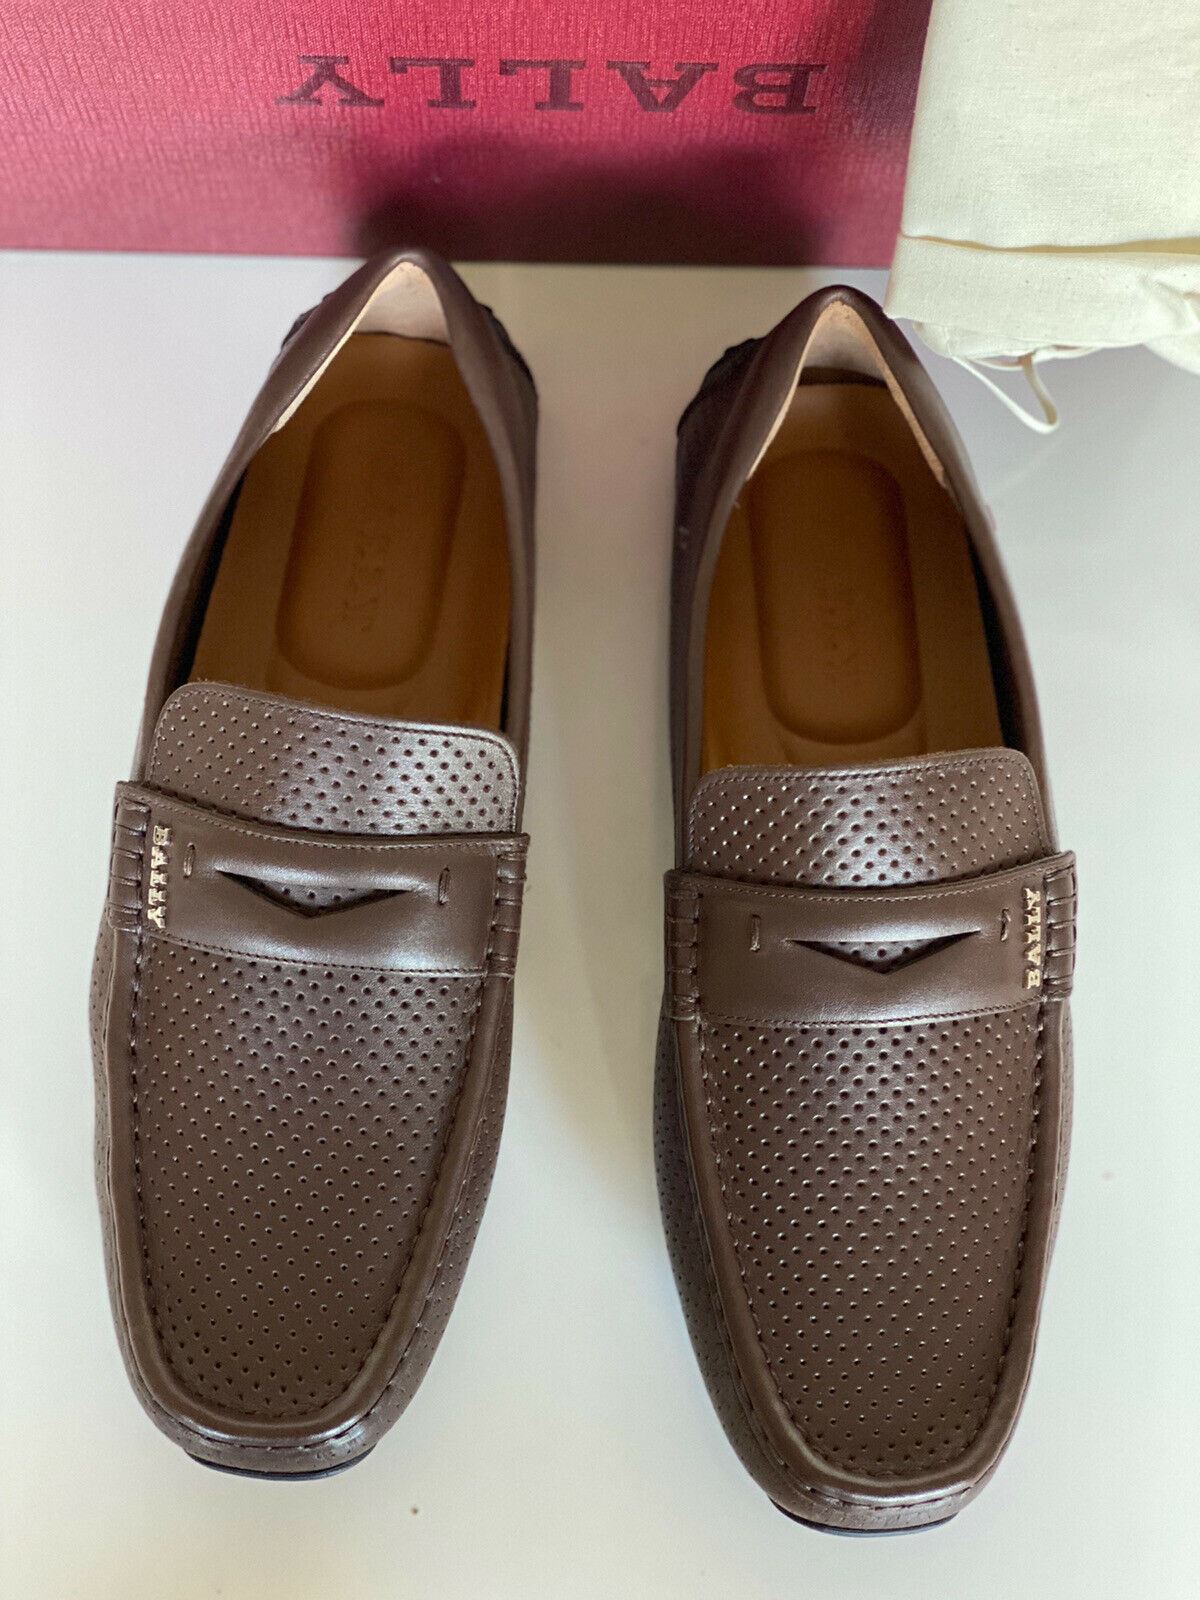 NIB Bally Perforated Men's Calf Leather Driver Loafers Coconut 11 D US 6231354